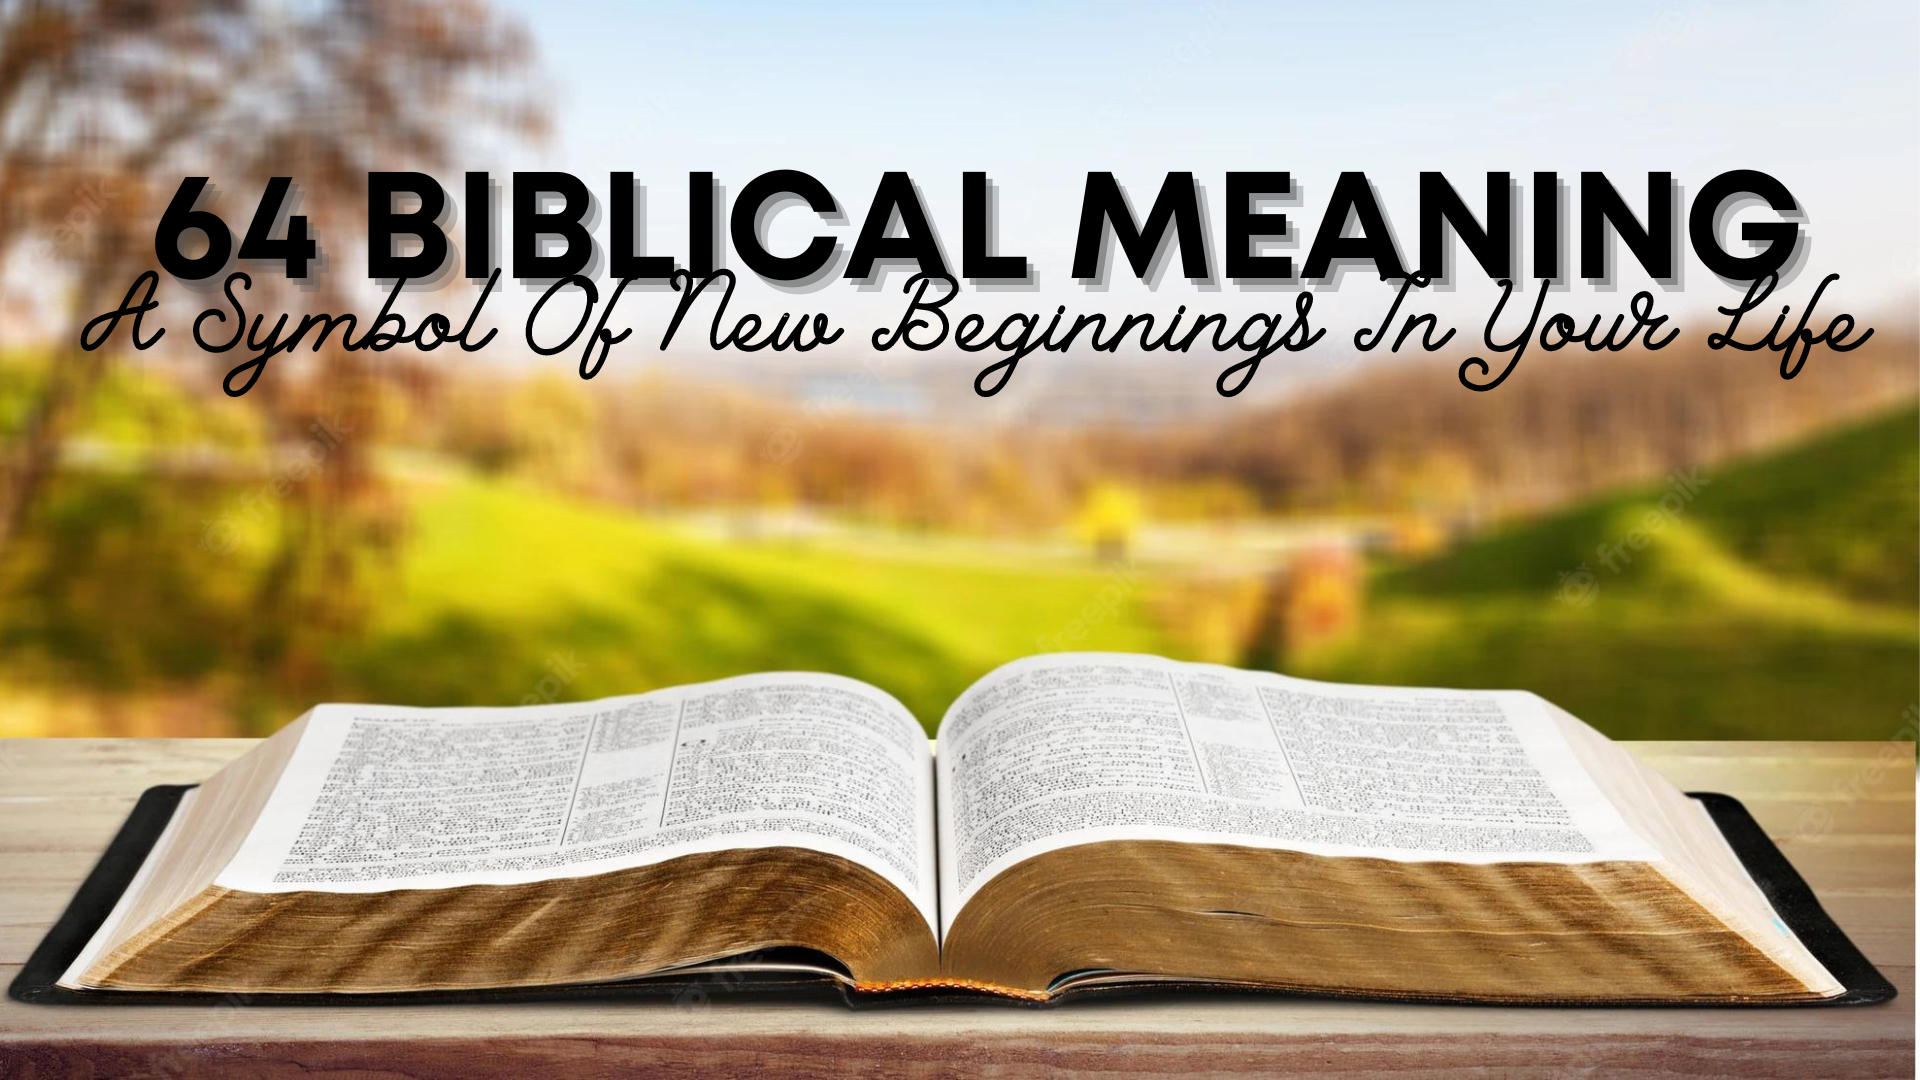 64 Biblical Meaning - A Symbol Of New Beginnings In Your Life